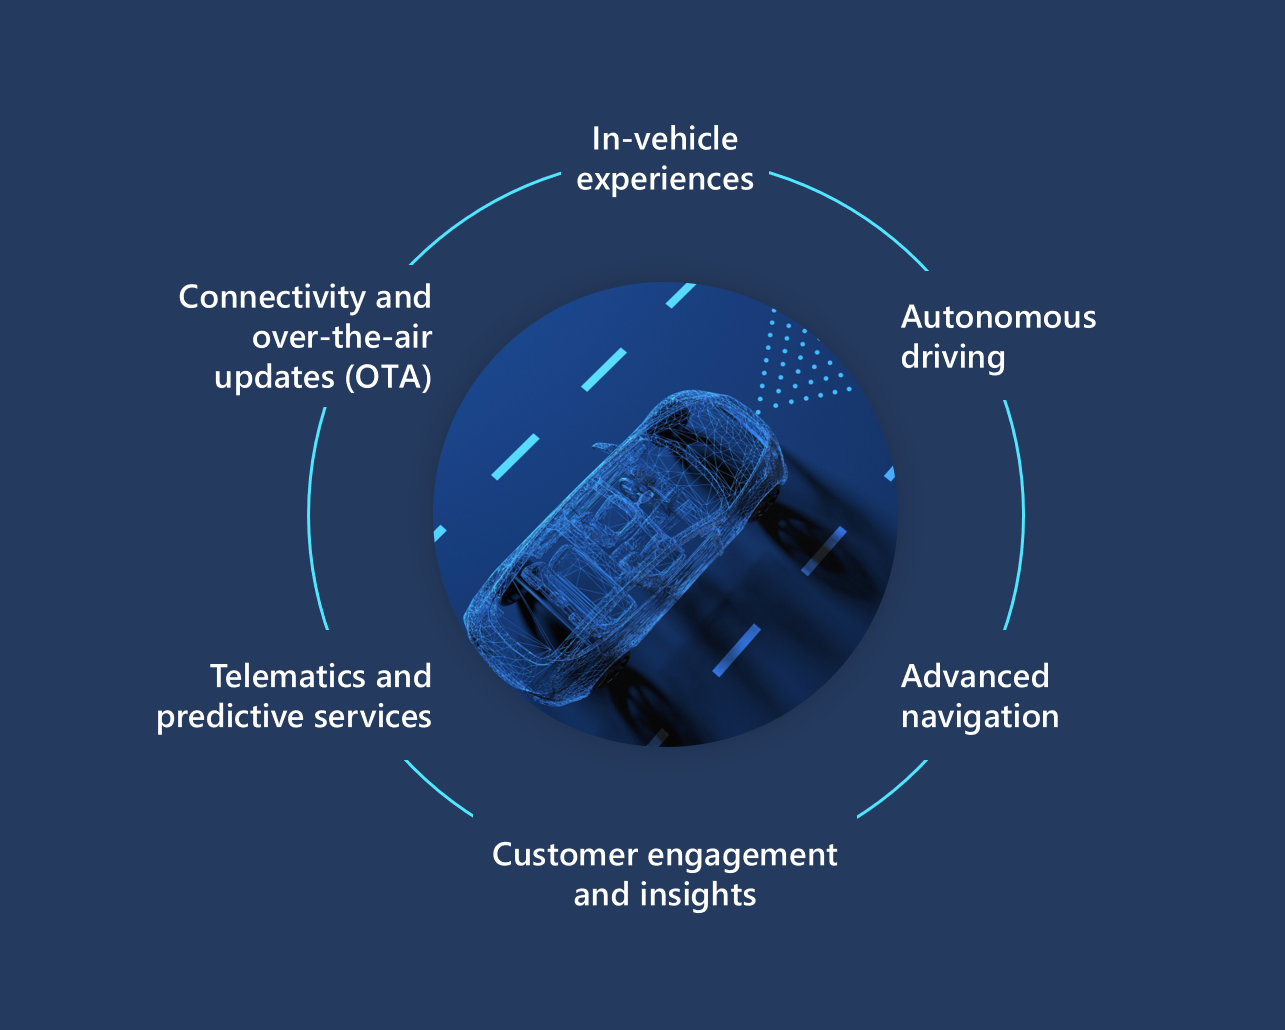 An image showing the aspects of the Microsoft Connected Vehicle Platform.